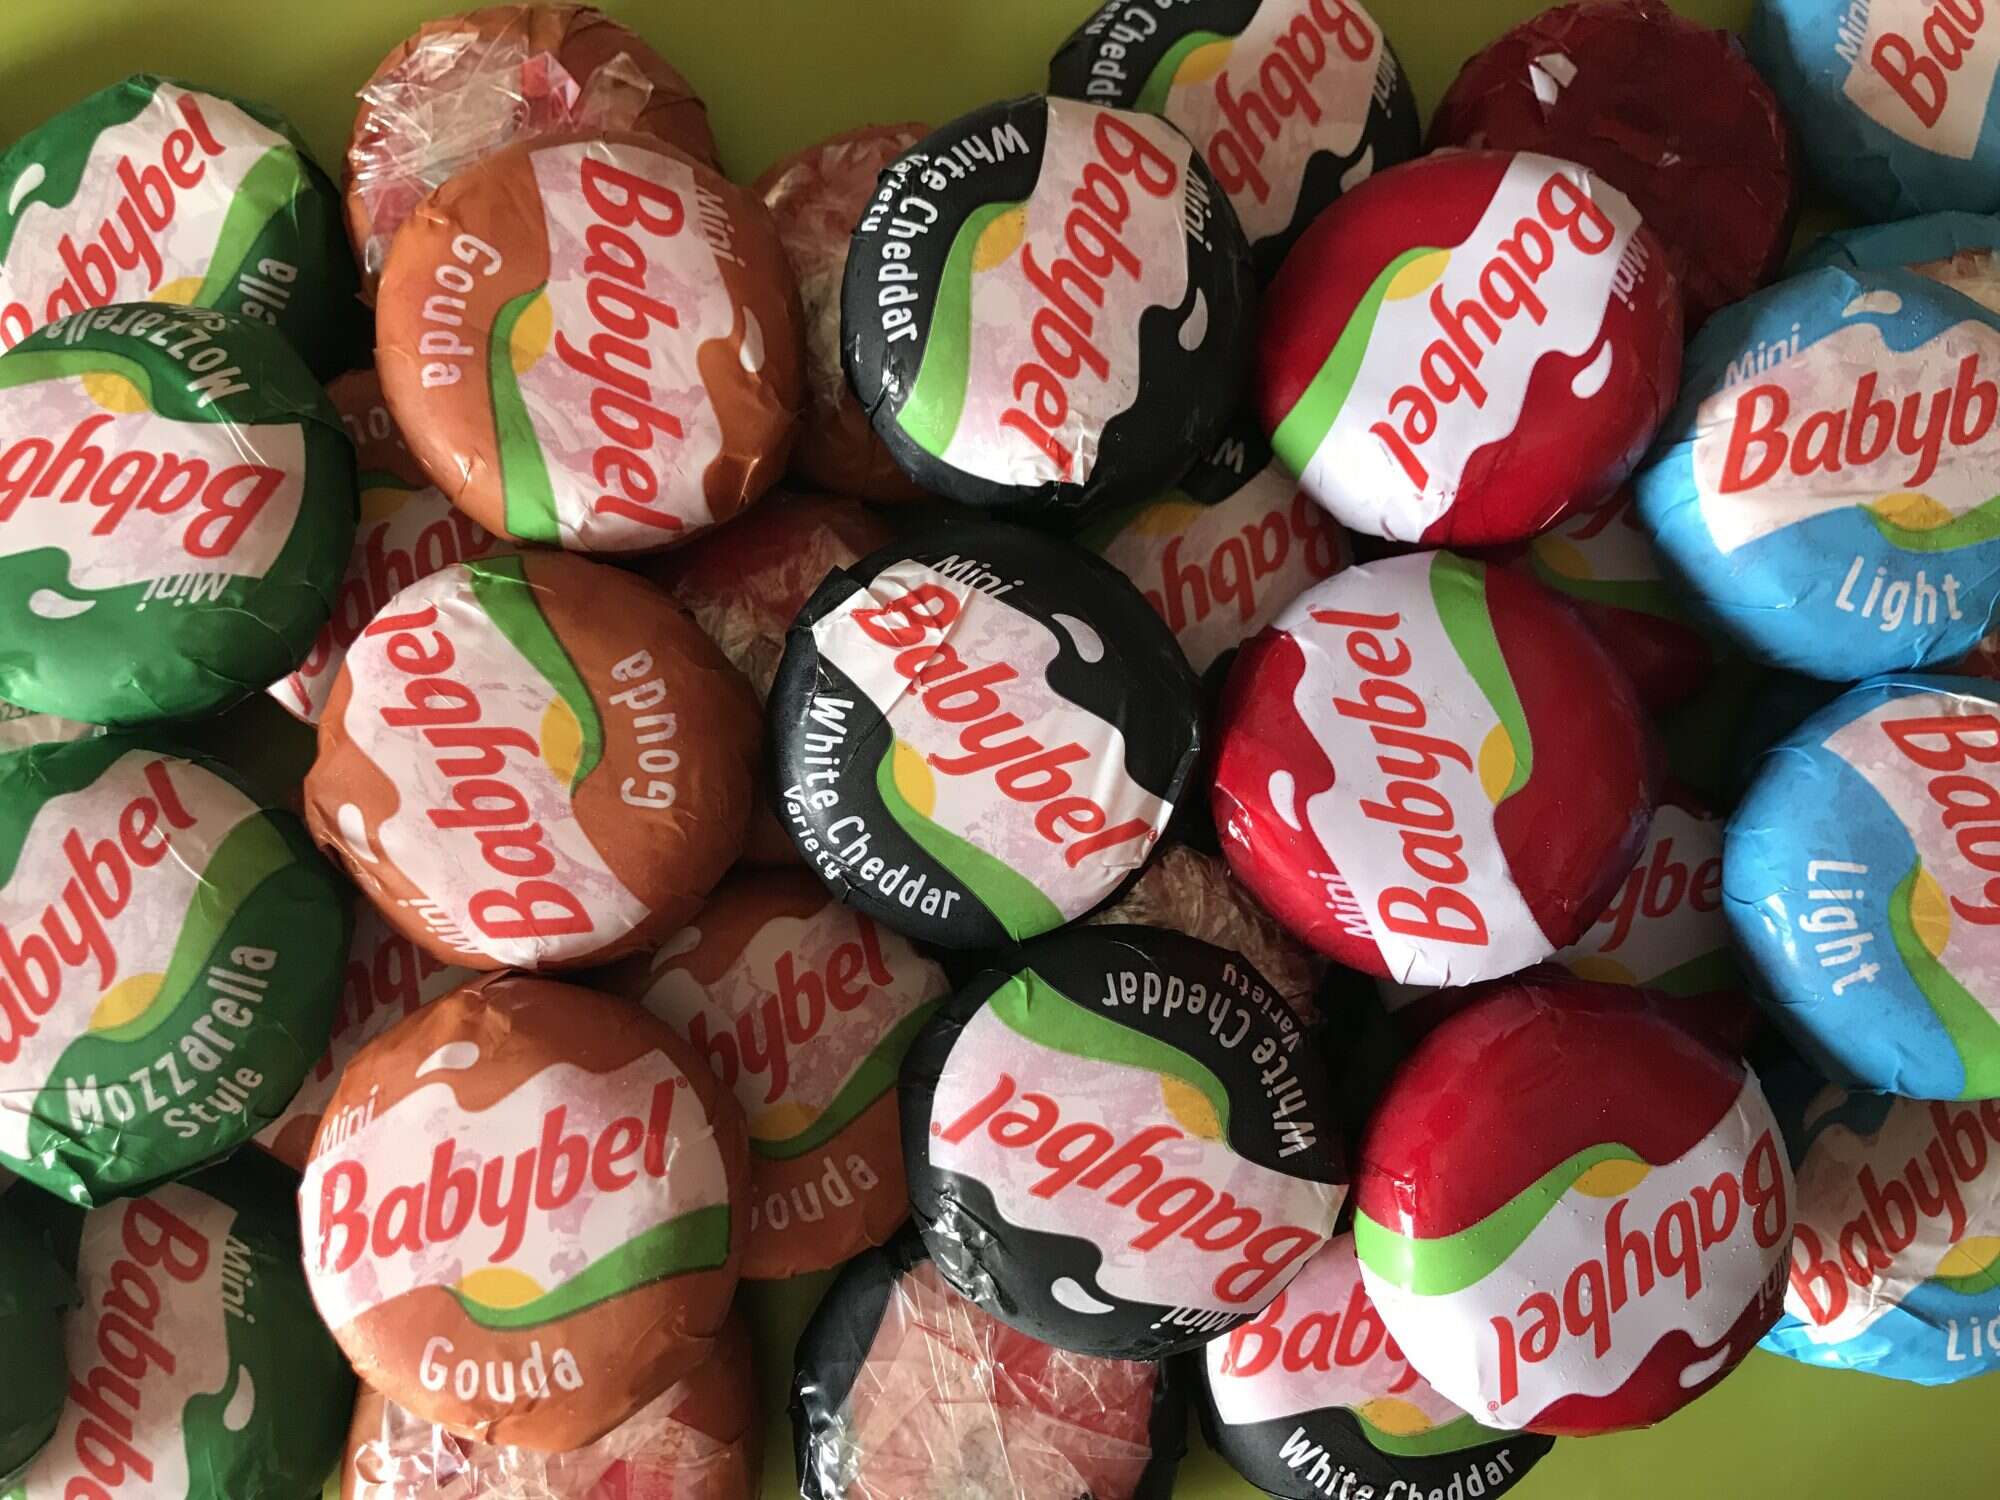 Extreme RARE GOLD Babybel Cheese MINI BRANDS